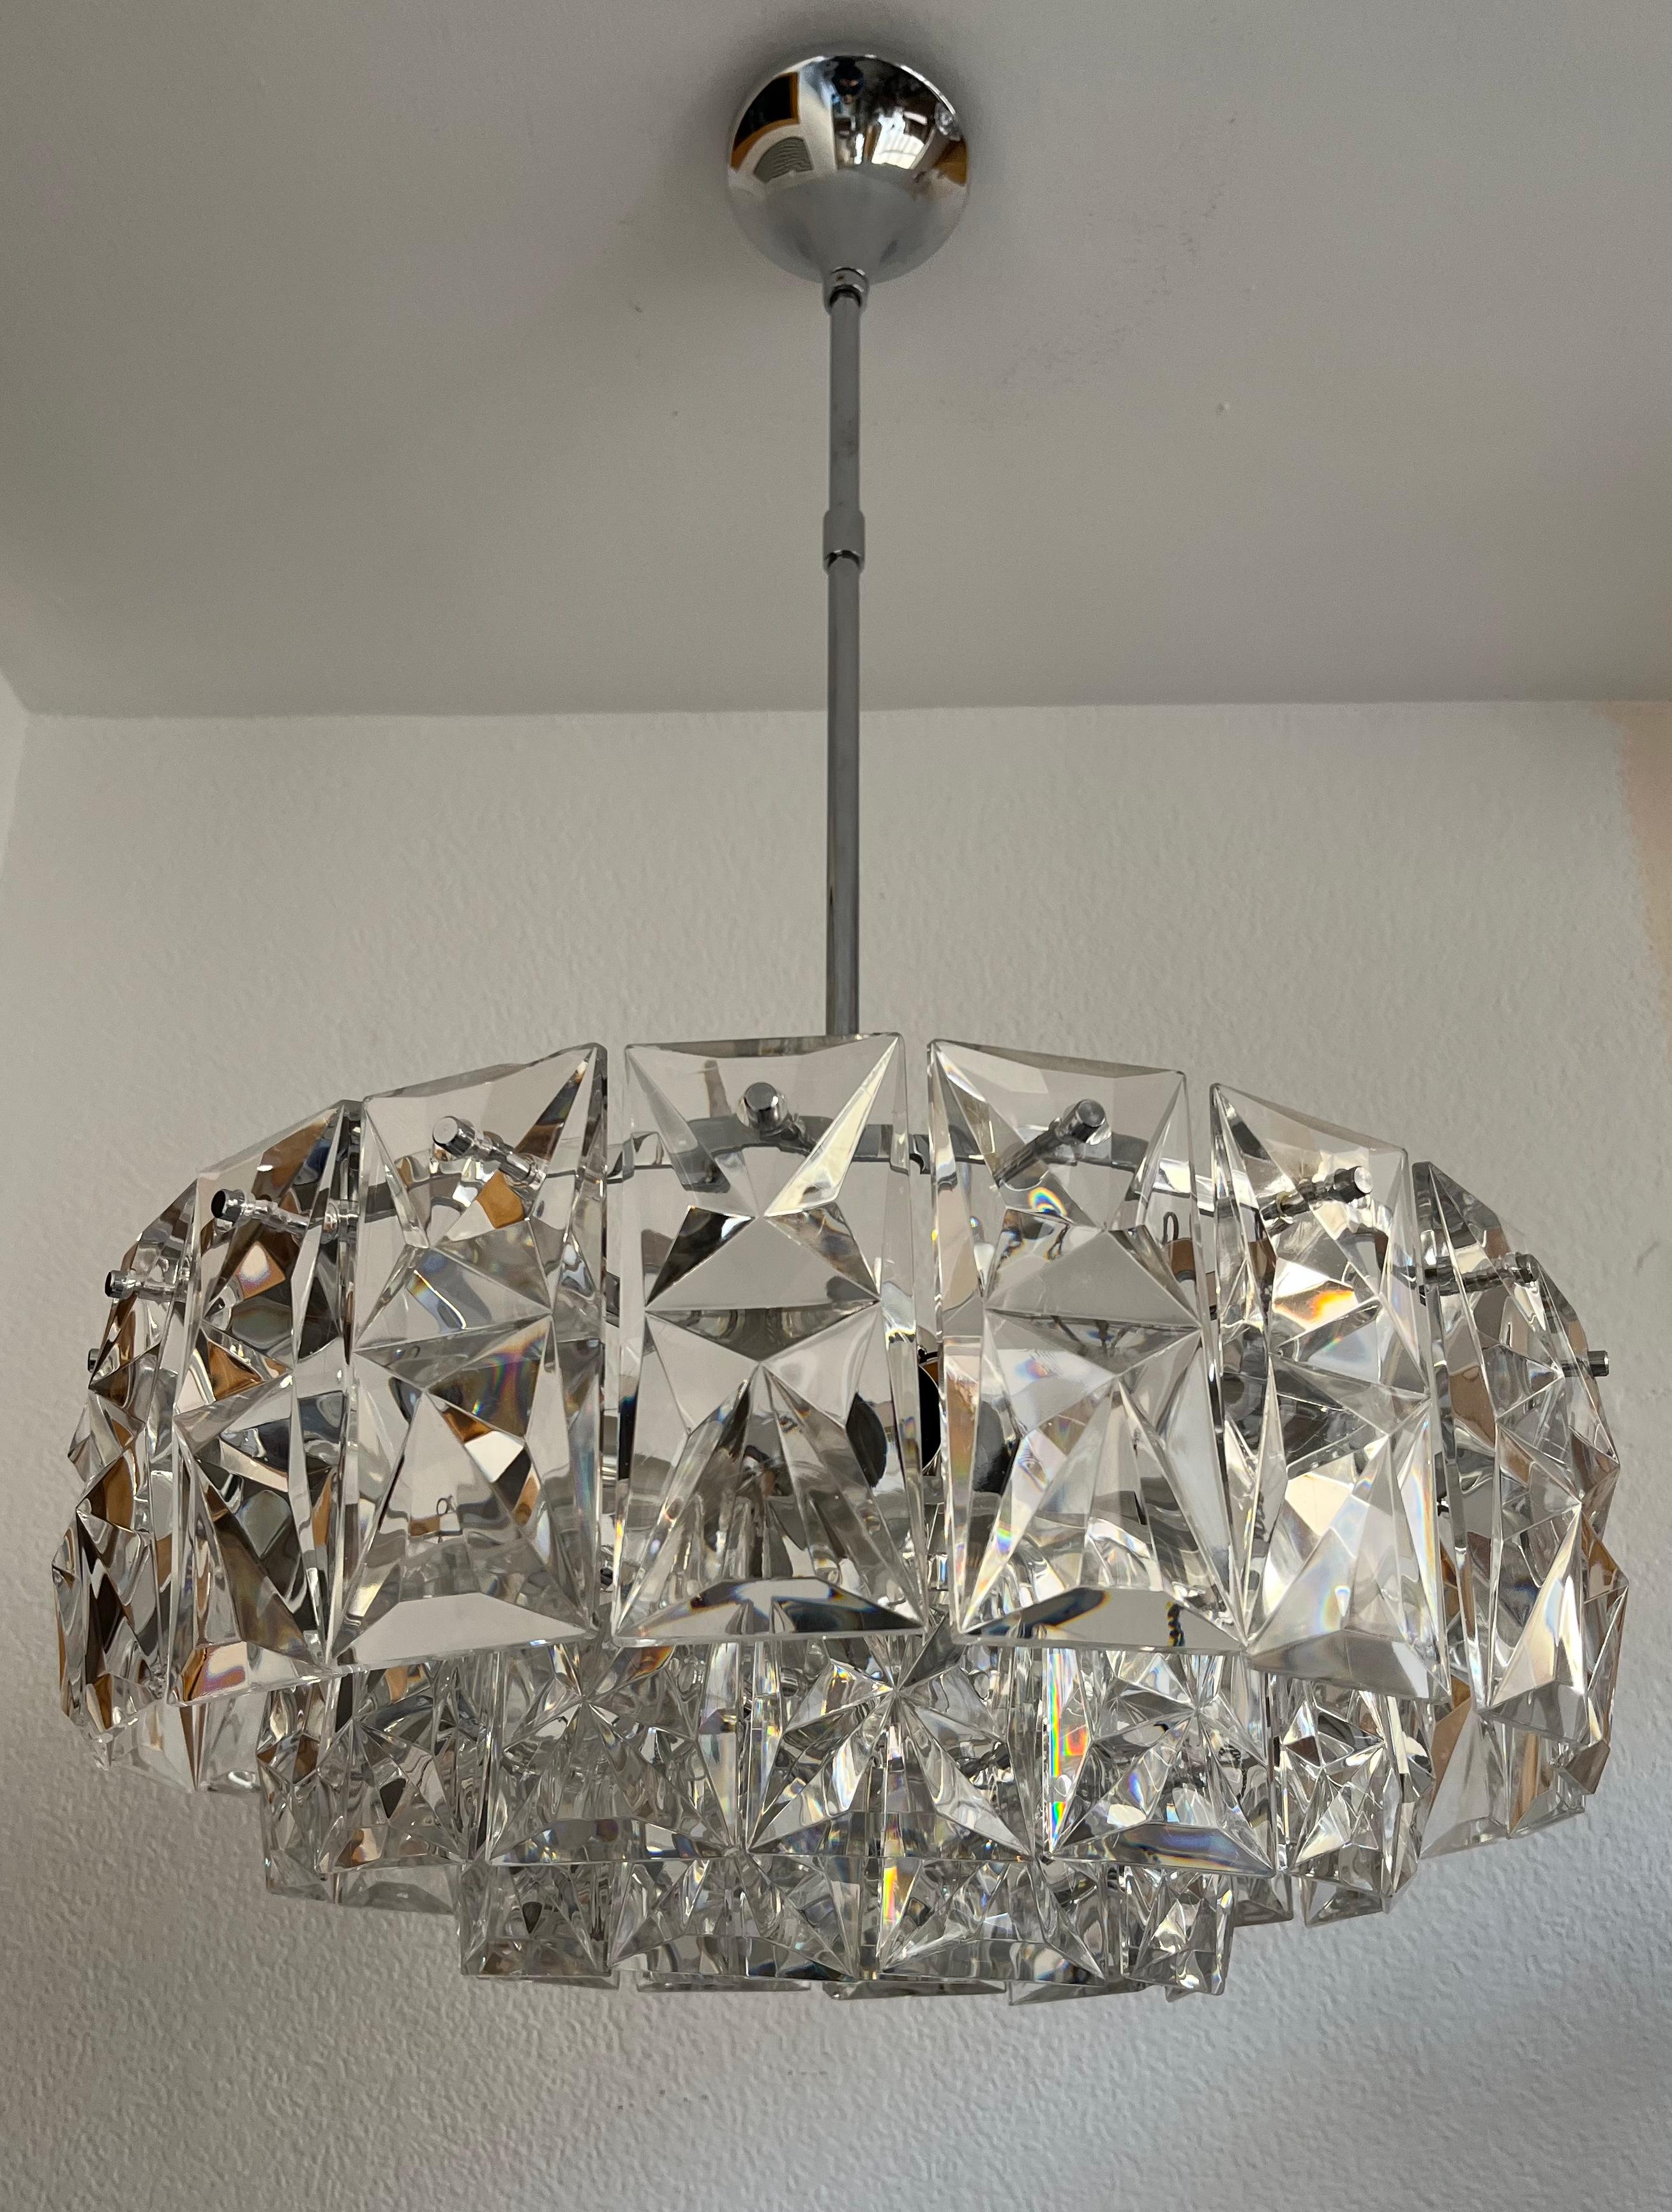 Large, beautya and gorgeous German Mid-century crystal Kinkeldey Chandelier. This Chandelier was designed and manufactured in Germany during the 1970s by Kinkeldey Leuchten.
This chandelier is composed by 50 units of crystals and metal chromed